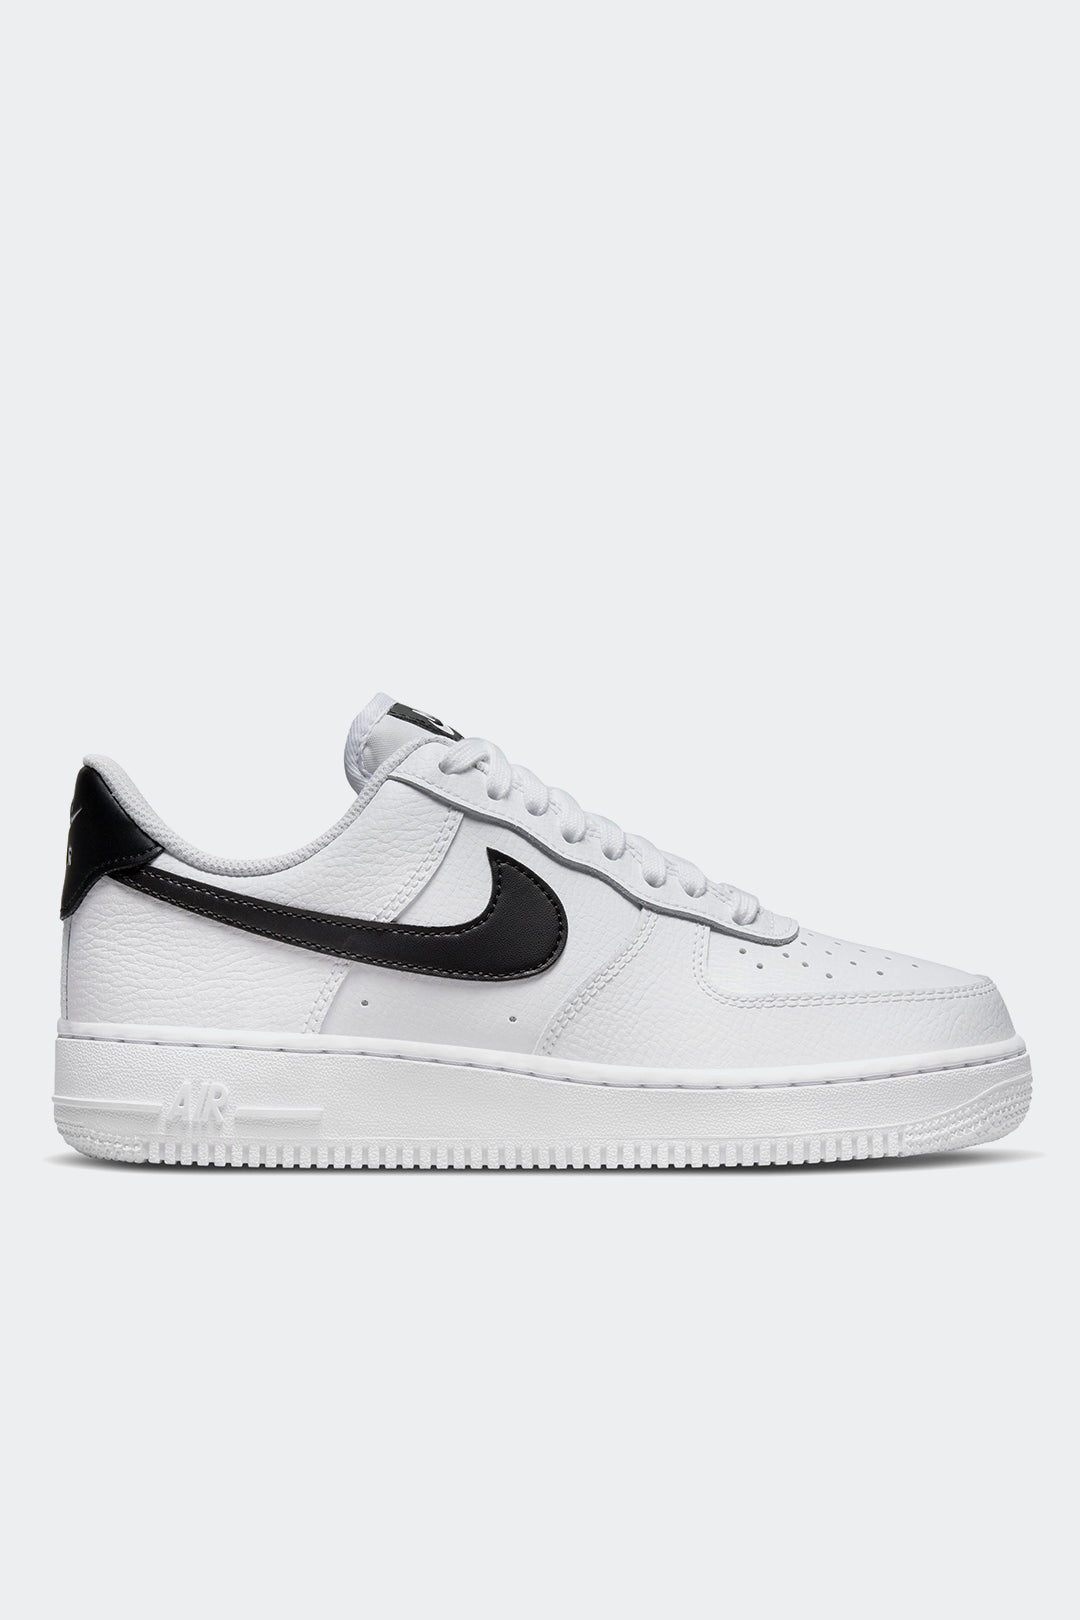 Mujer Nike Air Force 1 Sp23